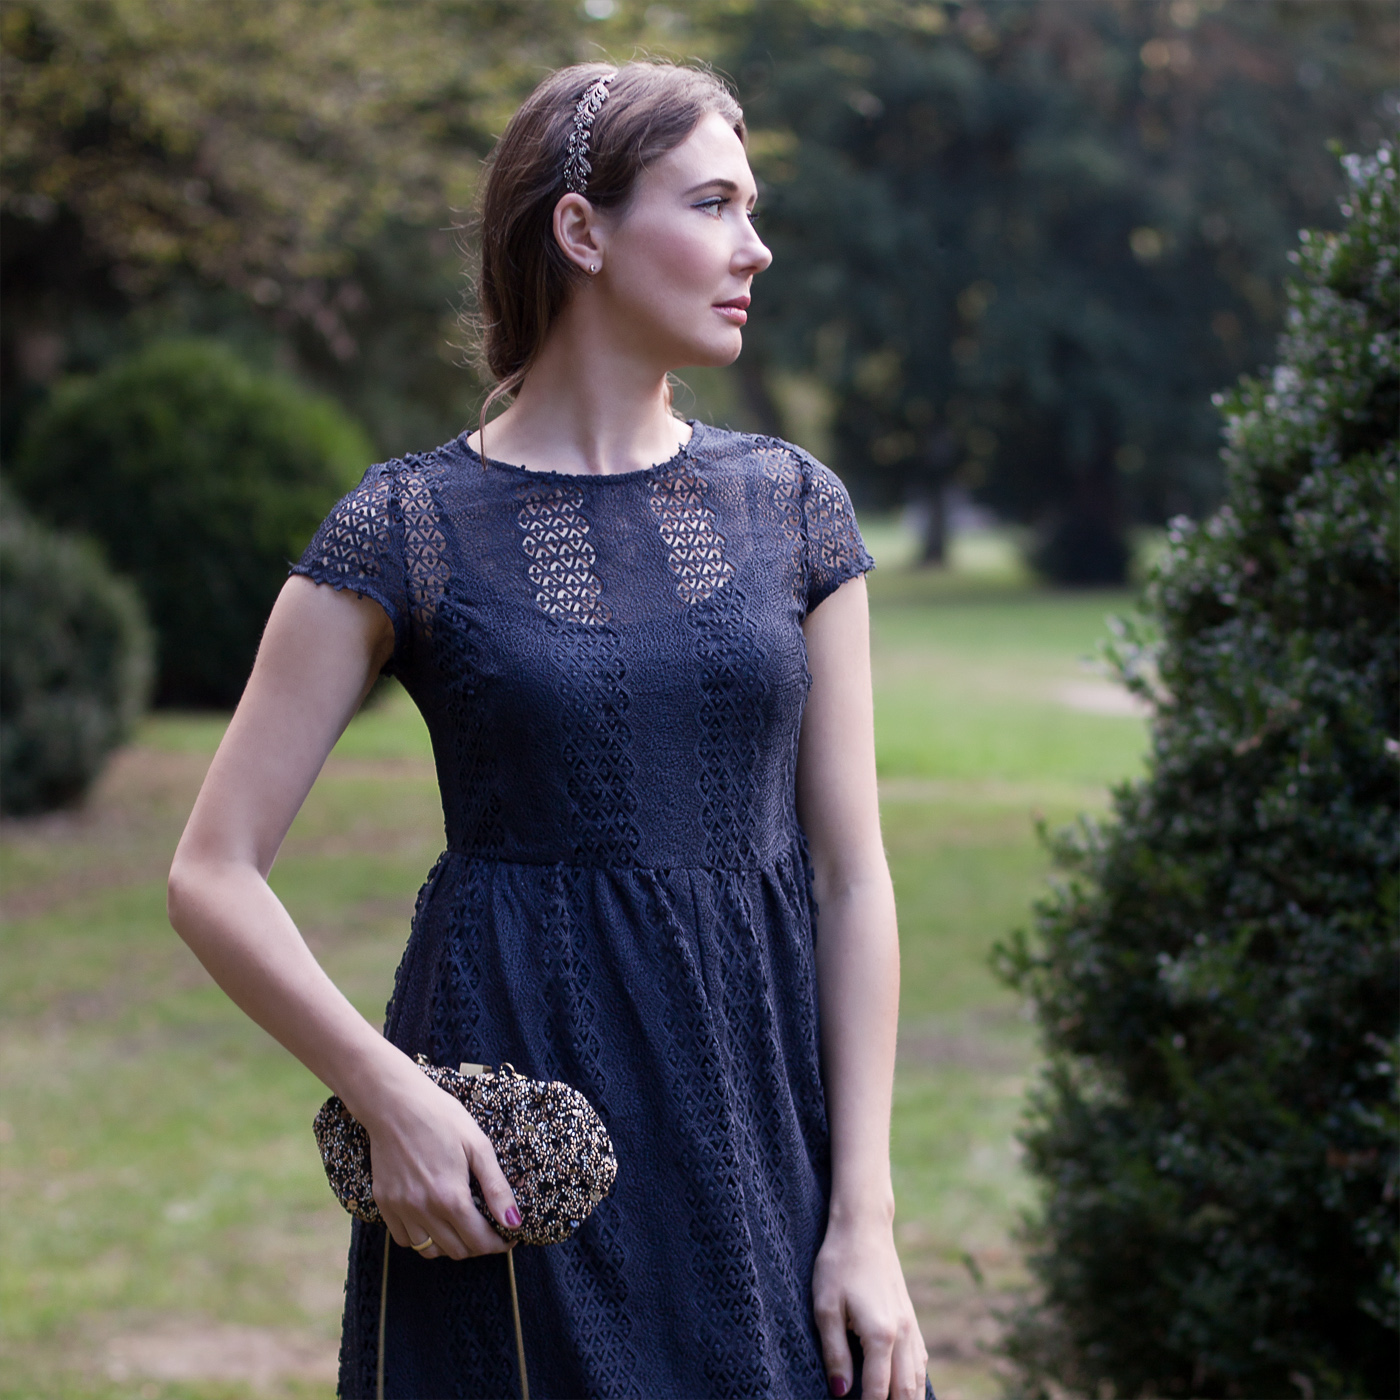 zaraoutfit_maxi_dress_lace_fashionblog_autumnlook_chic_sophisticated_7